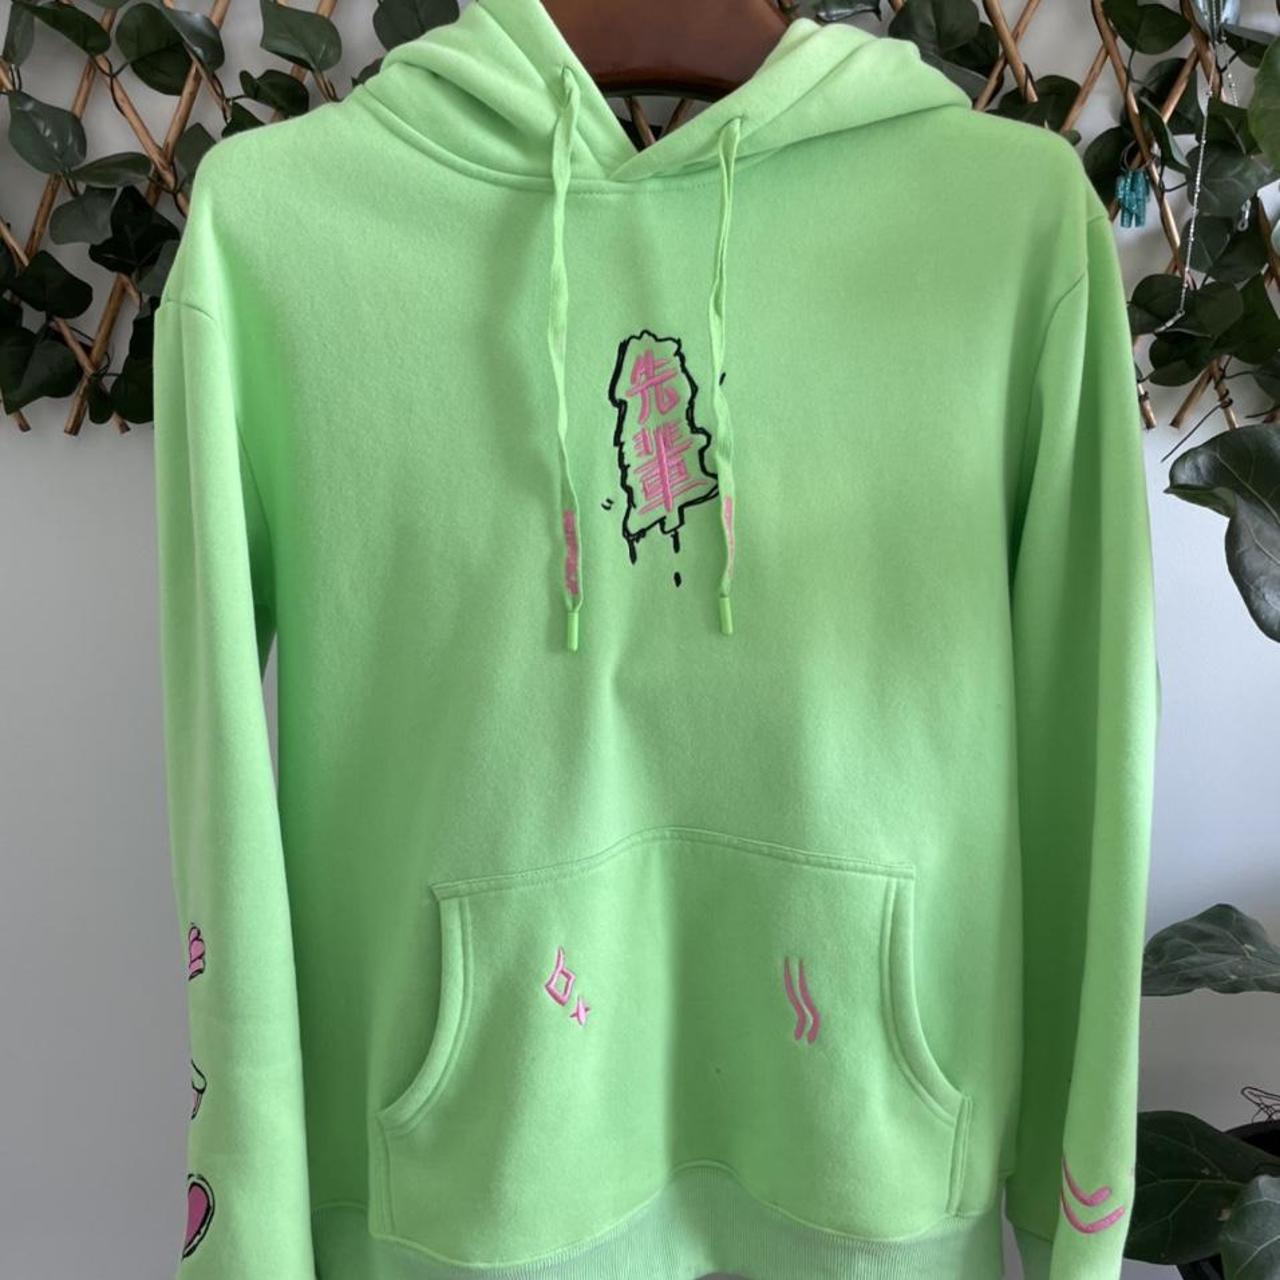 Anime girl embroidered hoodie. Super warm and comfy,... - Depop